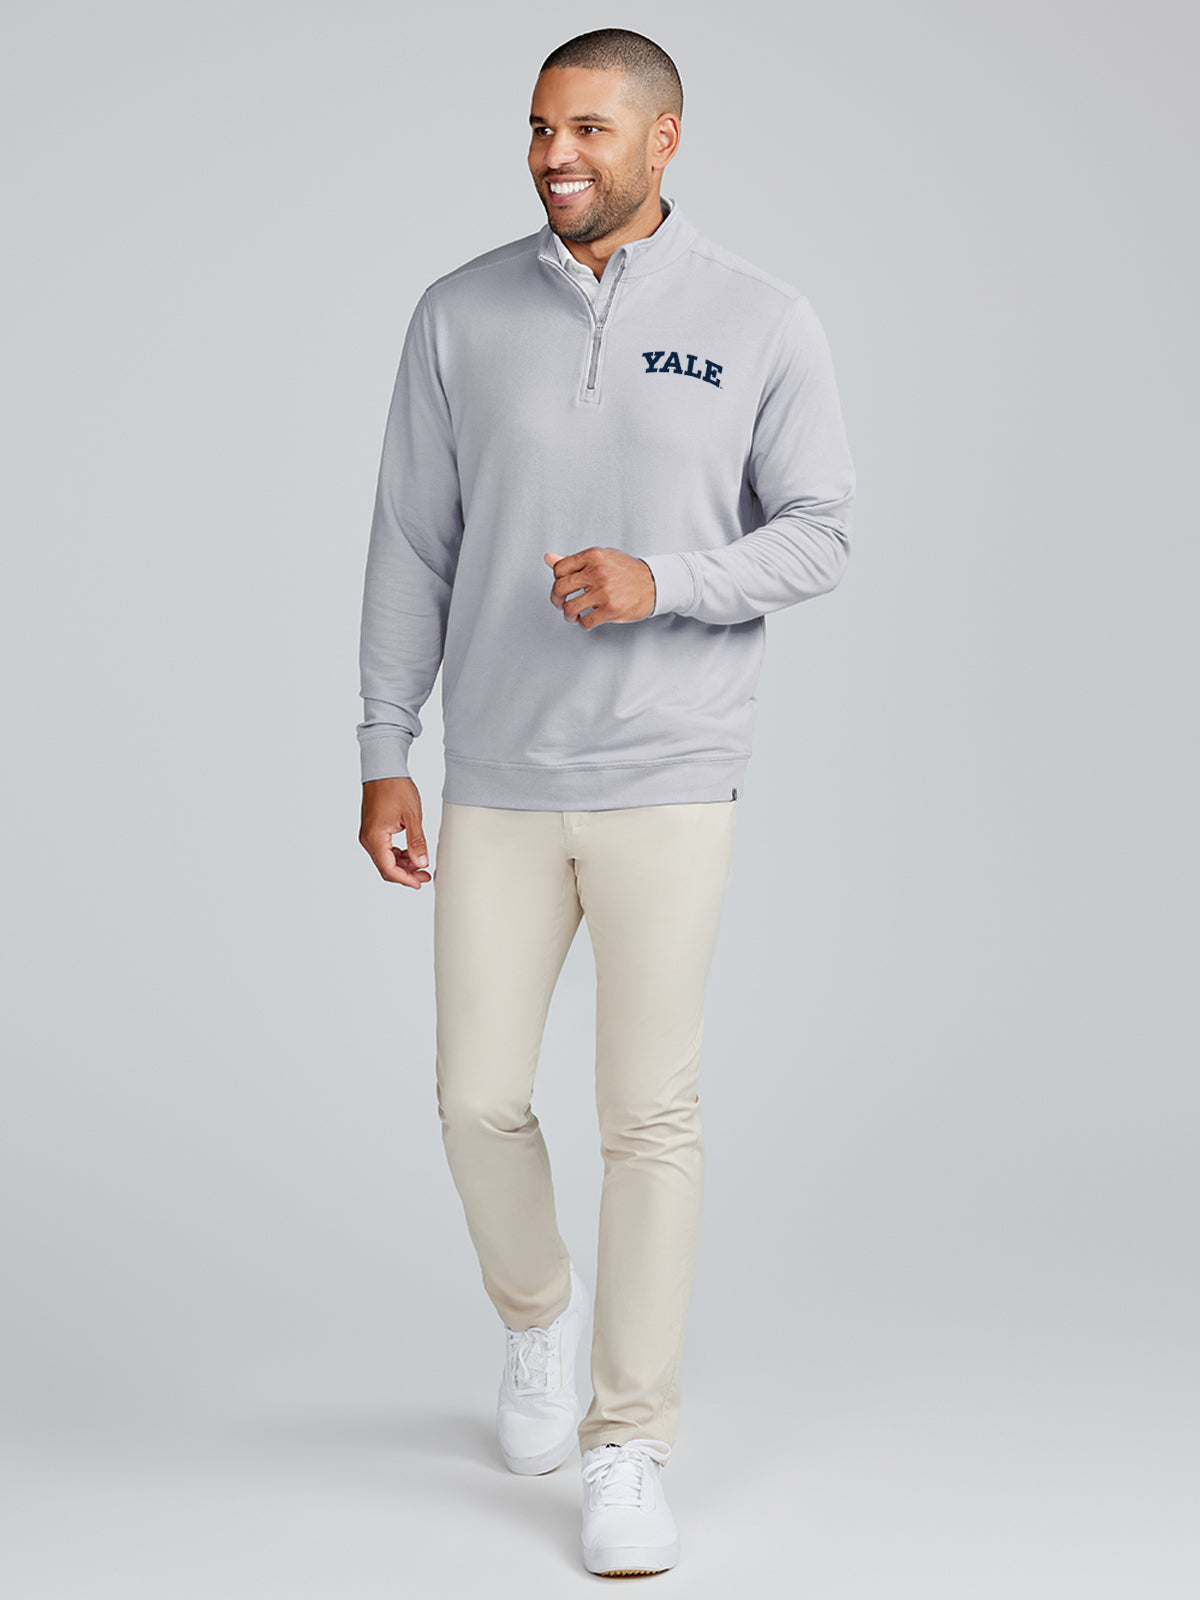 Cloud French Terry Quarter Zip - Yale - tasc Performance (Alloy)